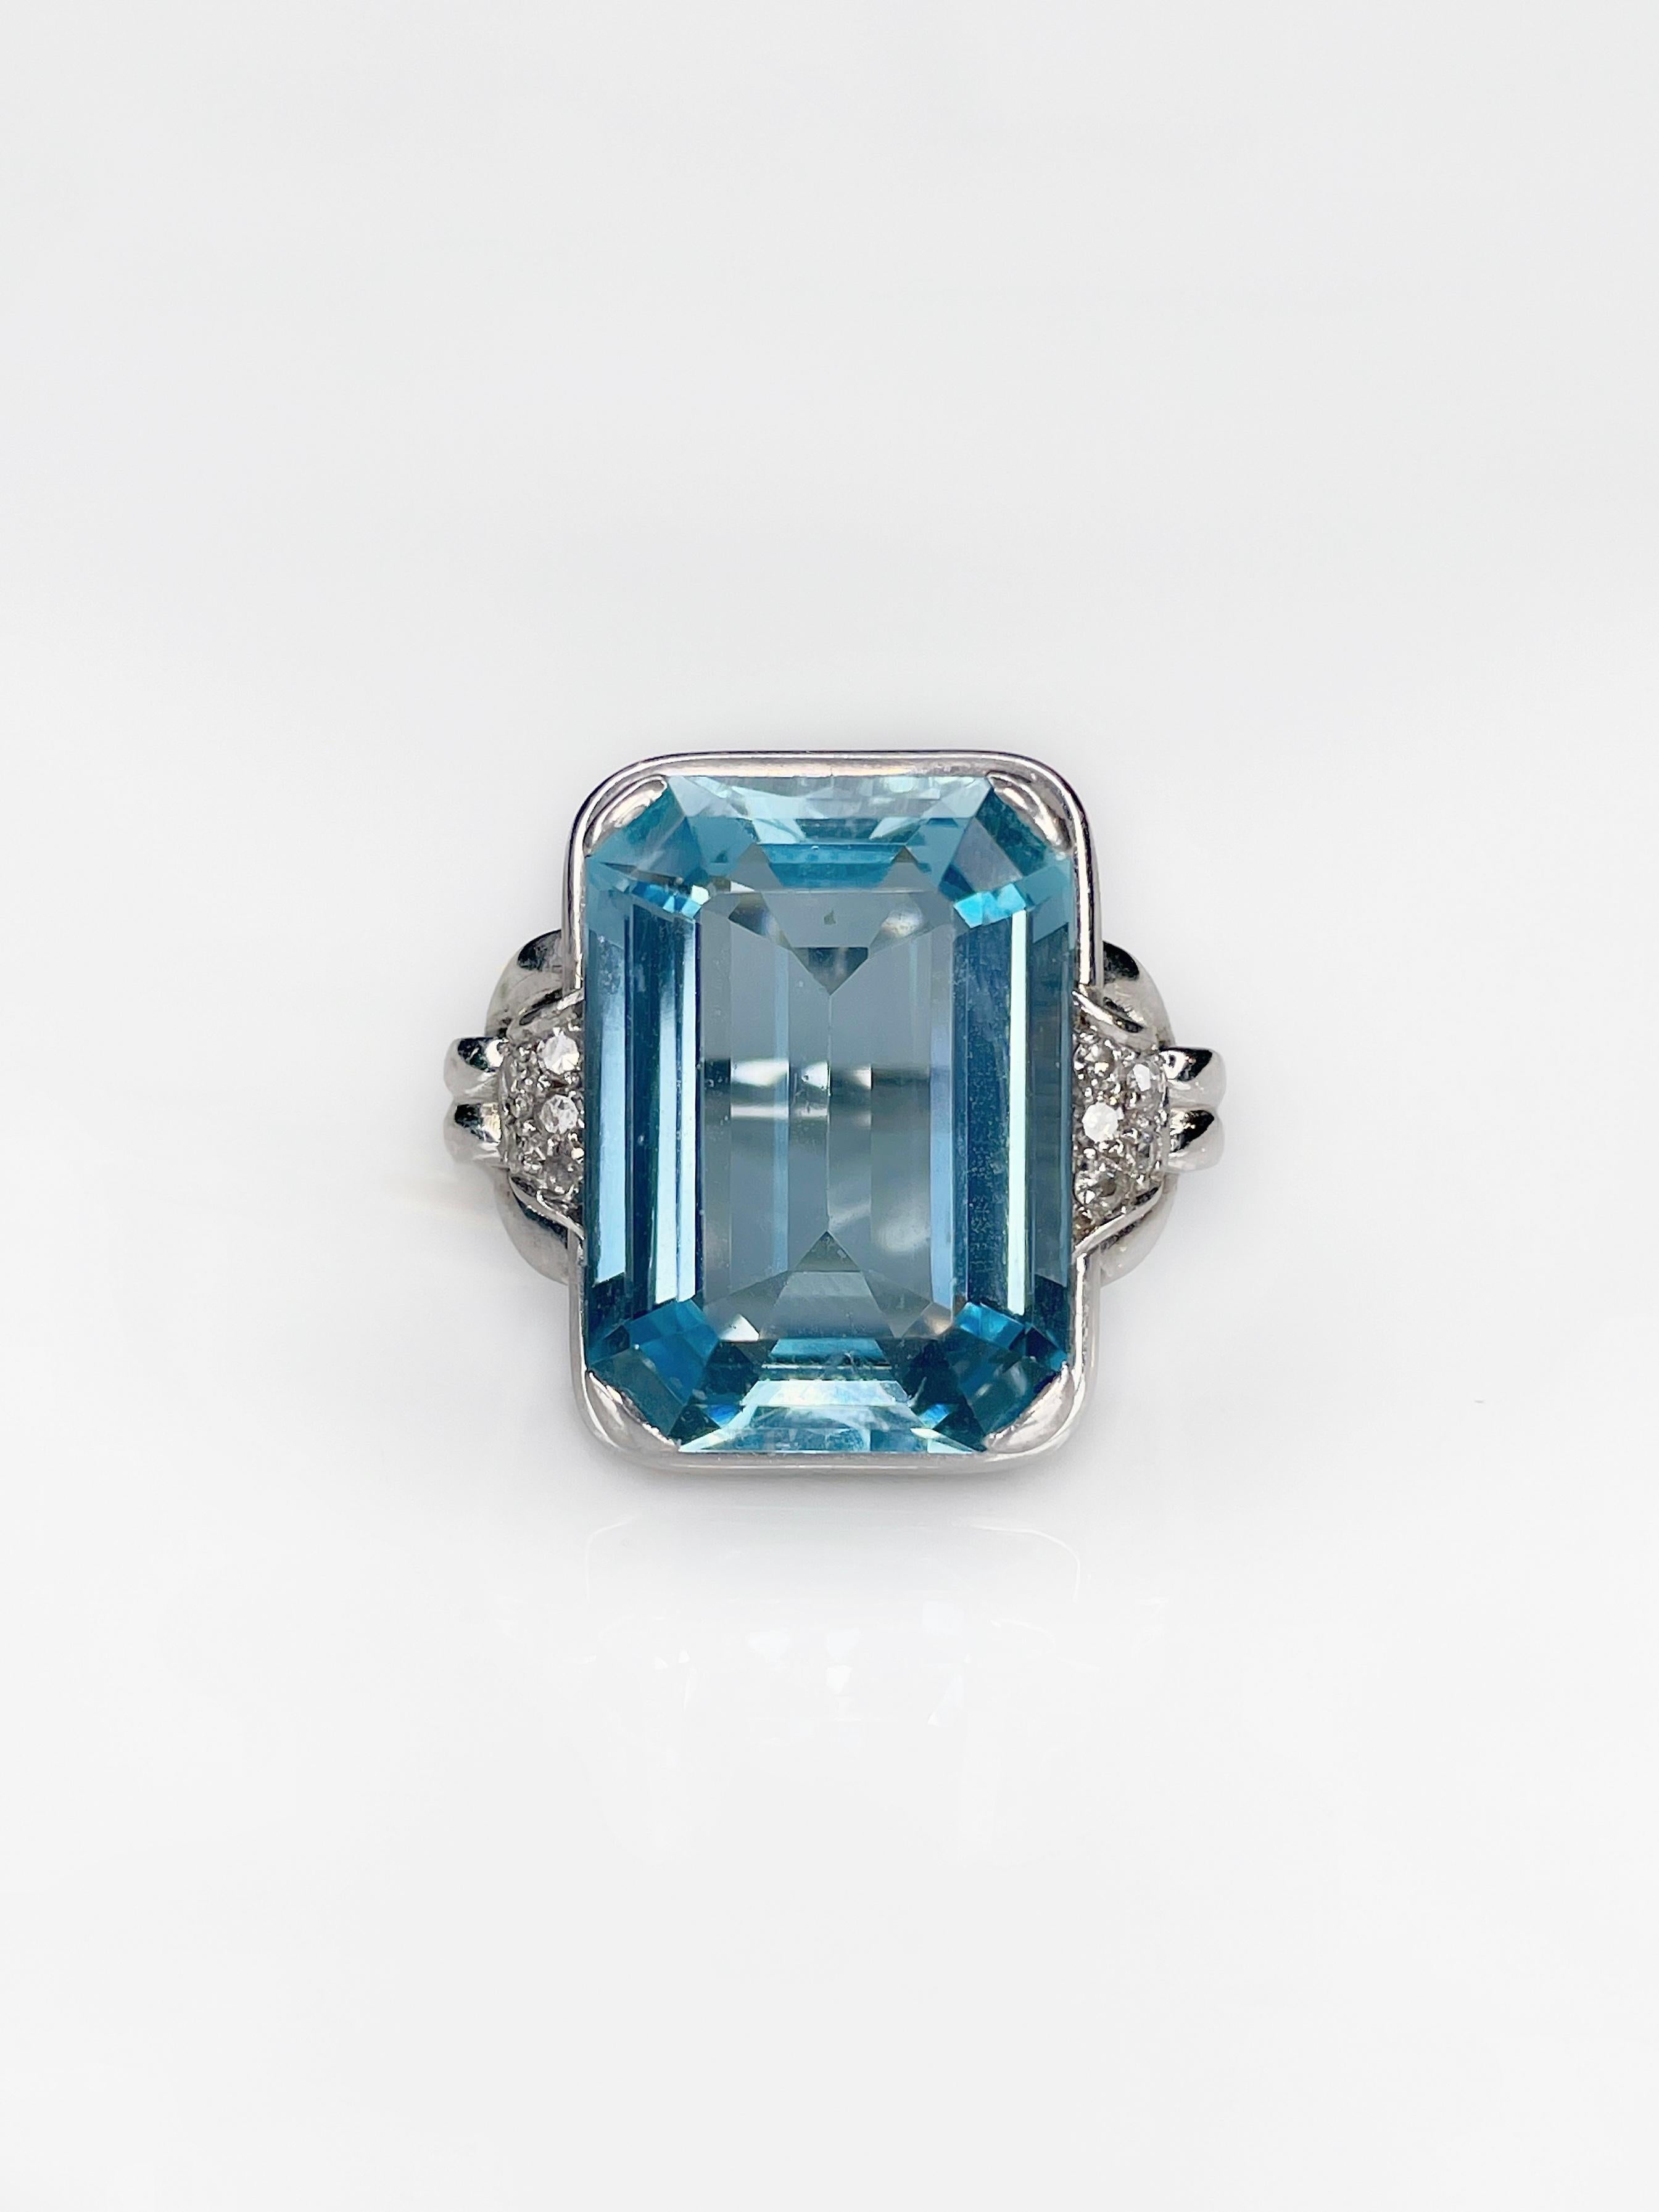 This is a magnificent Art Deco style modern cocktail rectangular ring crafted in 14K white gold. It boasts an exceptional Emerald cut Aquamarine which is 14.75ct (13x19mm), colour - very slightly greenish blue (vslgB 3/2), clarity - VS. The gem is